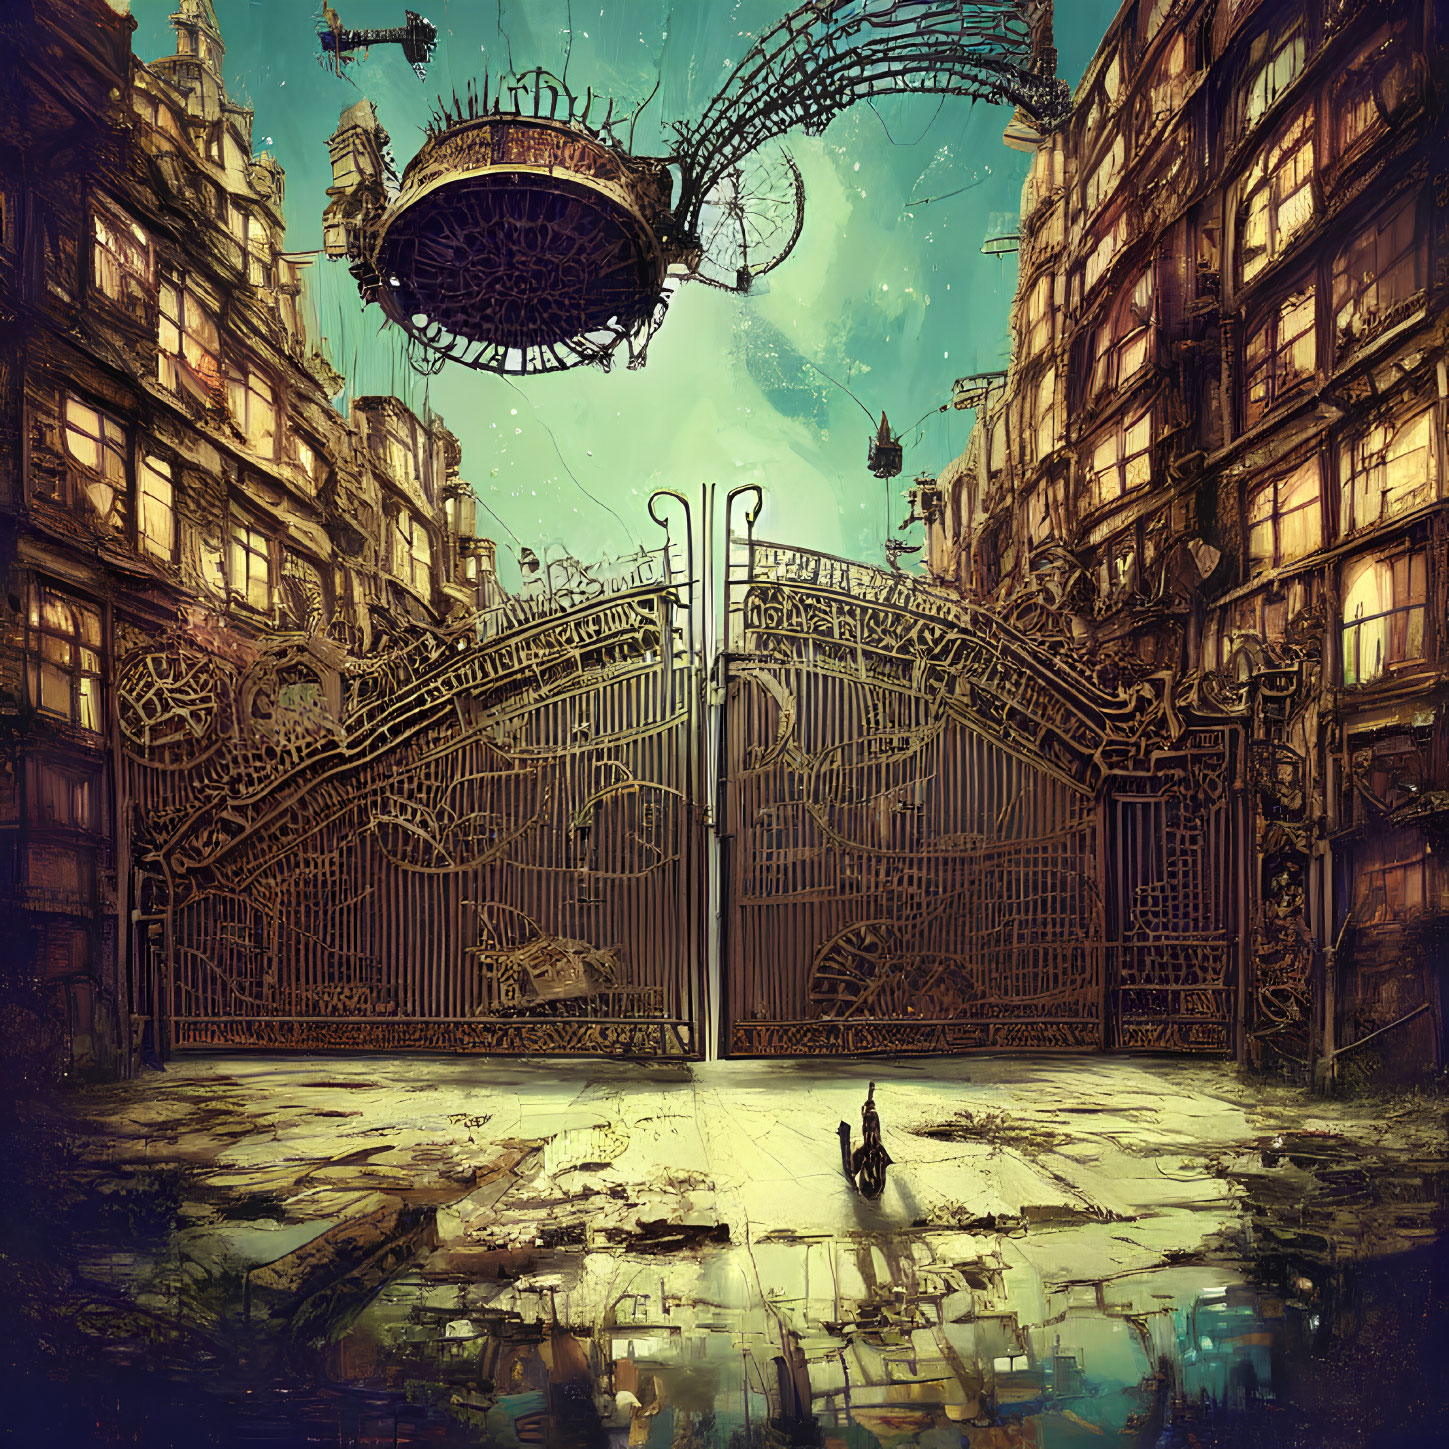 Steampunk-inspired iron gates, airship, and figure in front of abandoned buildings